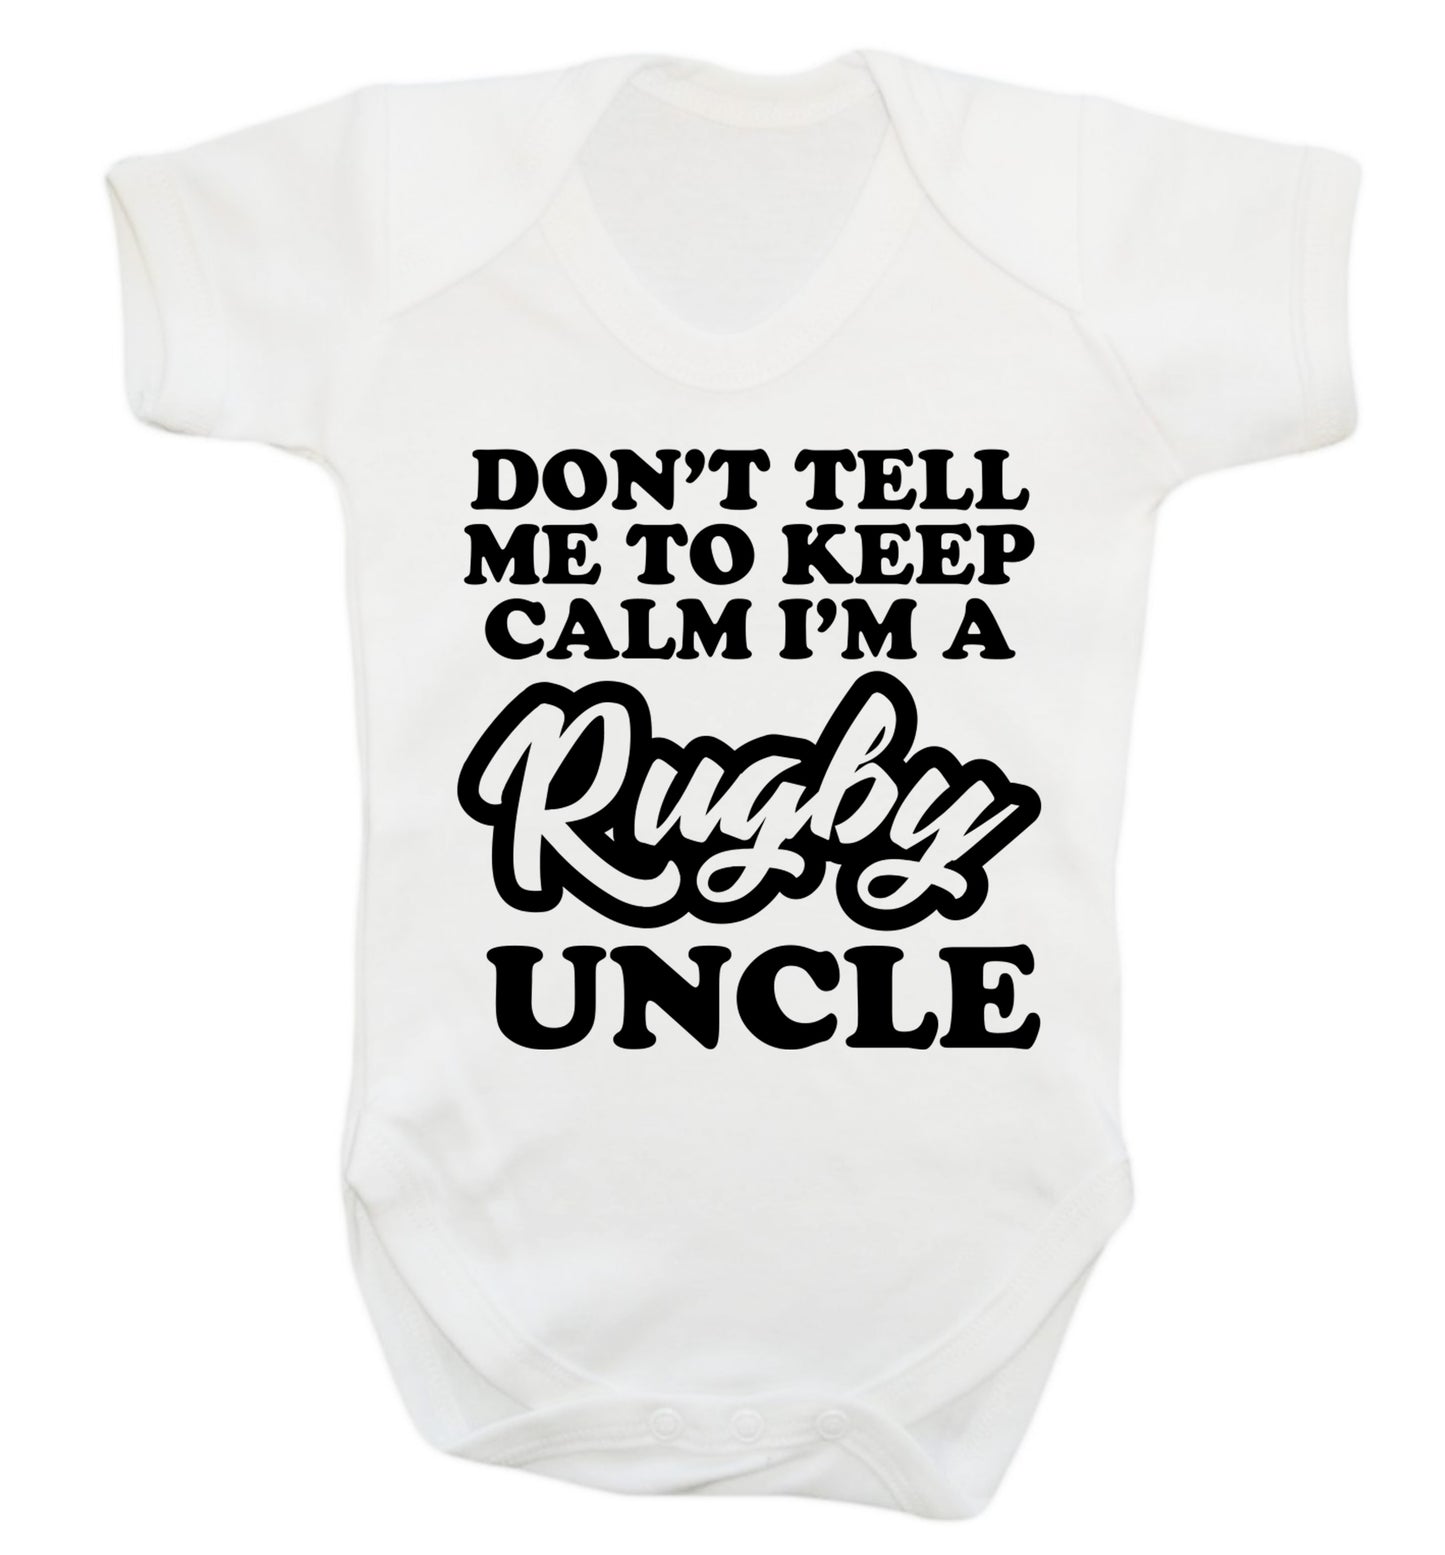 Don't tell me to keep calm I'm a rugby uncle Baby Vest white 18-24 months